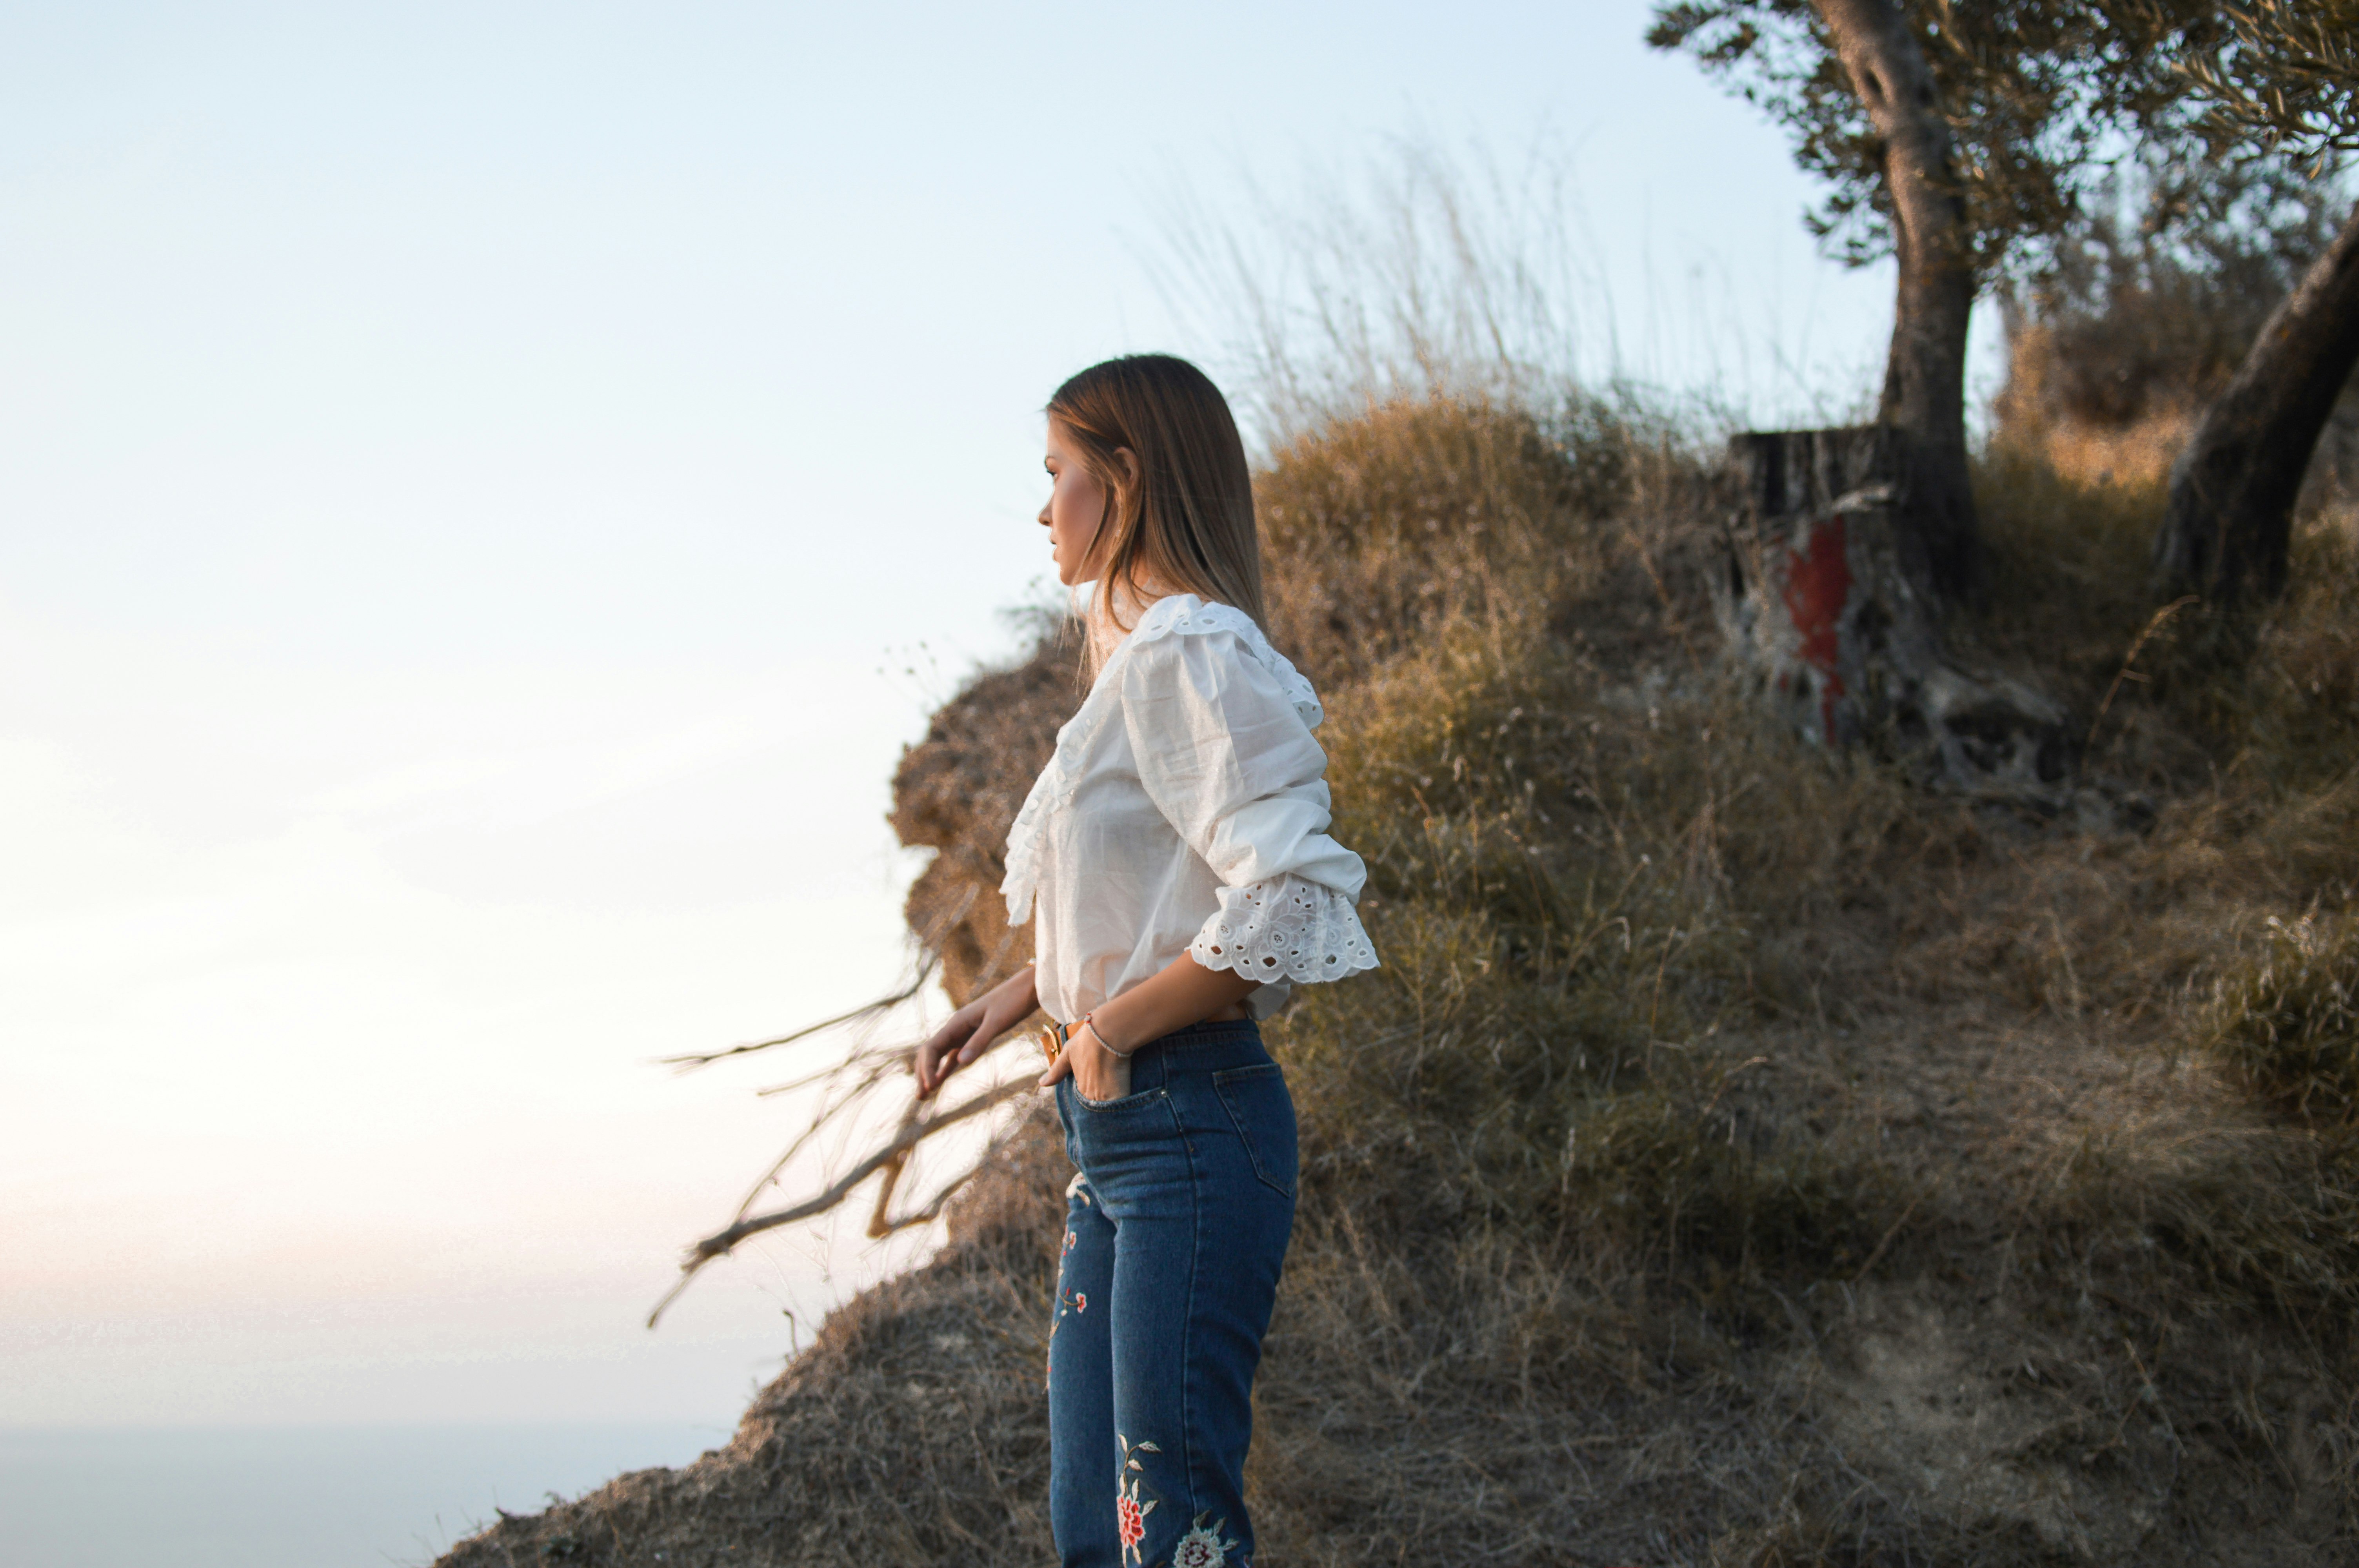 woman standing in mountain wearing white blouse watching body of water during daytime